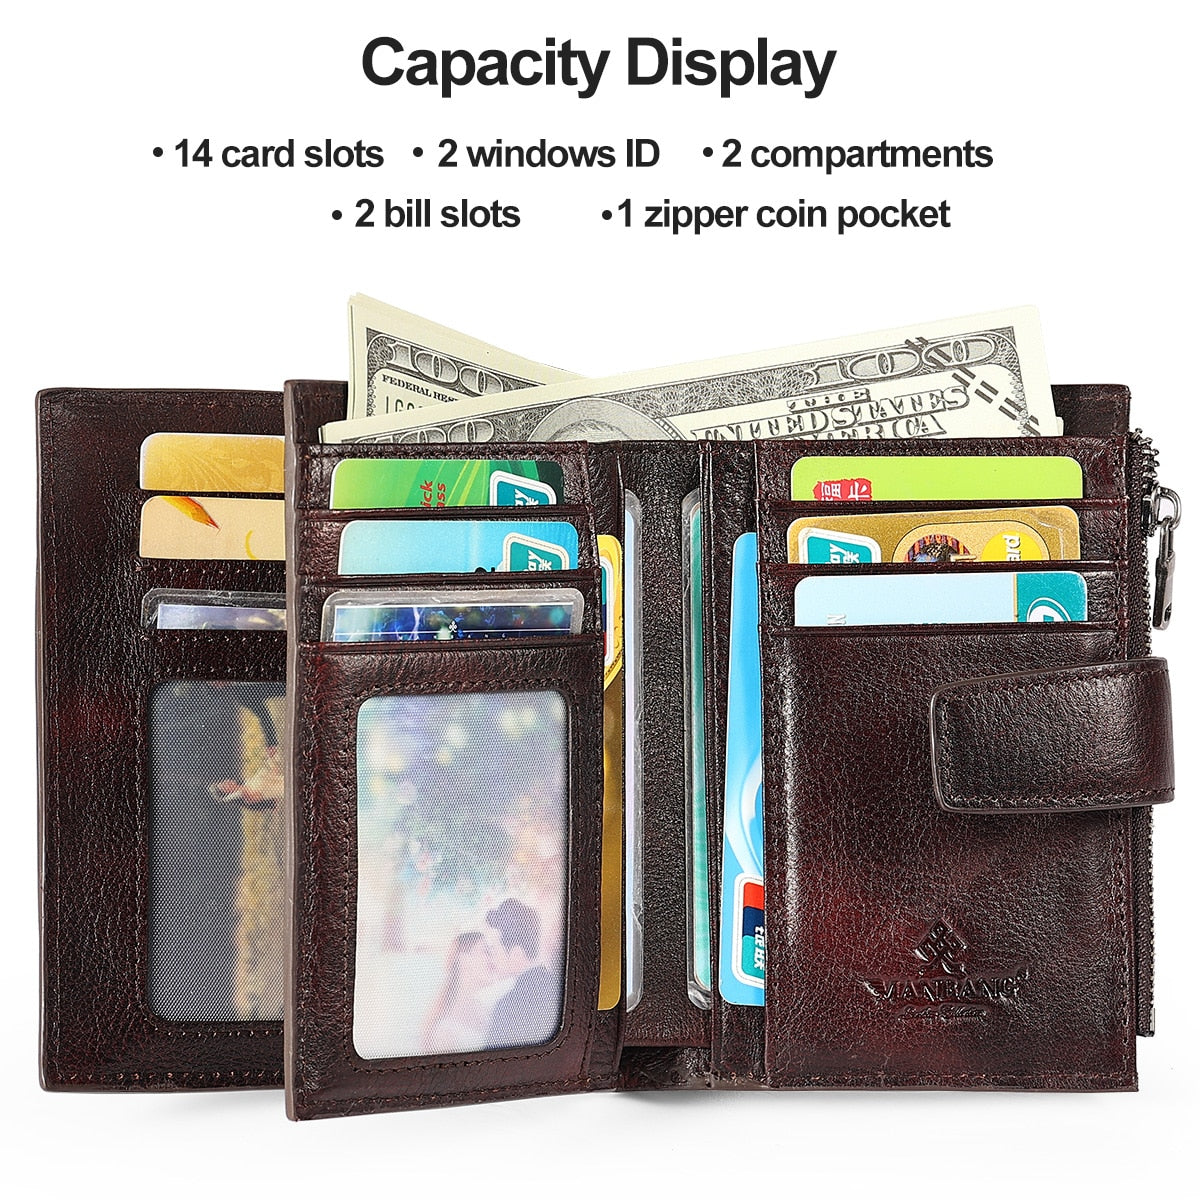 ManBang New Genuine Leather Men Wallets Fashion Trifold Wallet Zip Coin Pocket Purse Cowhide Leather man wallet High Quality